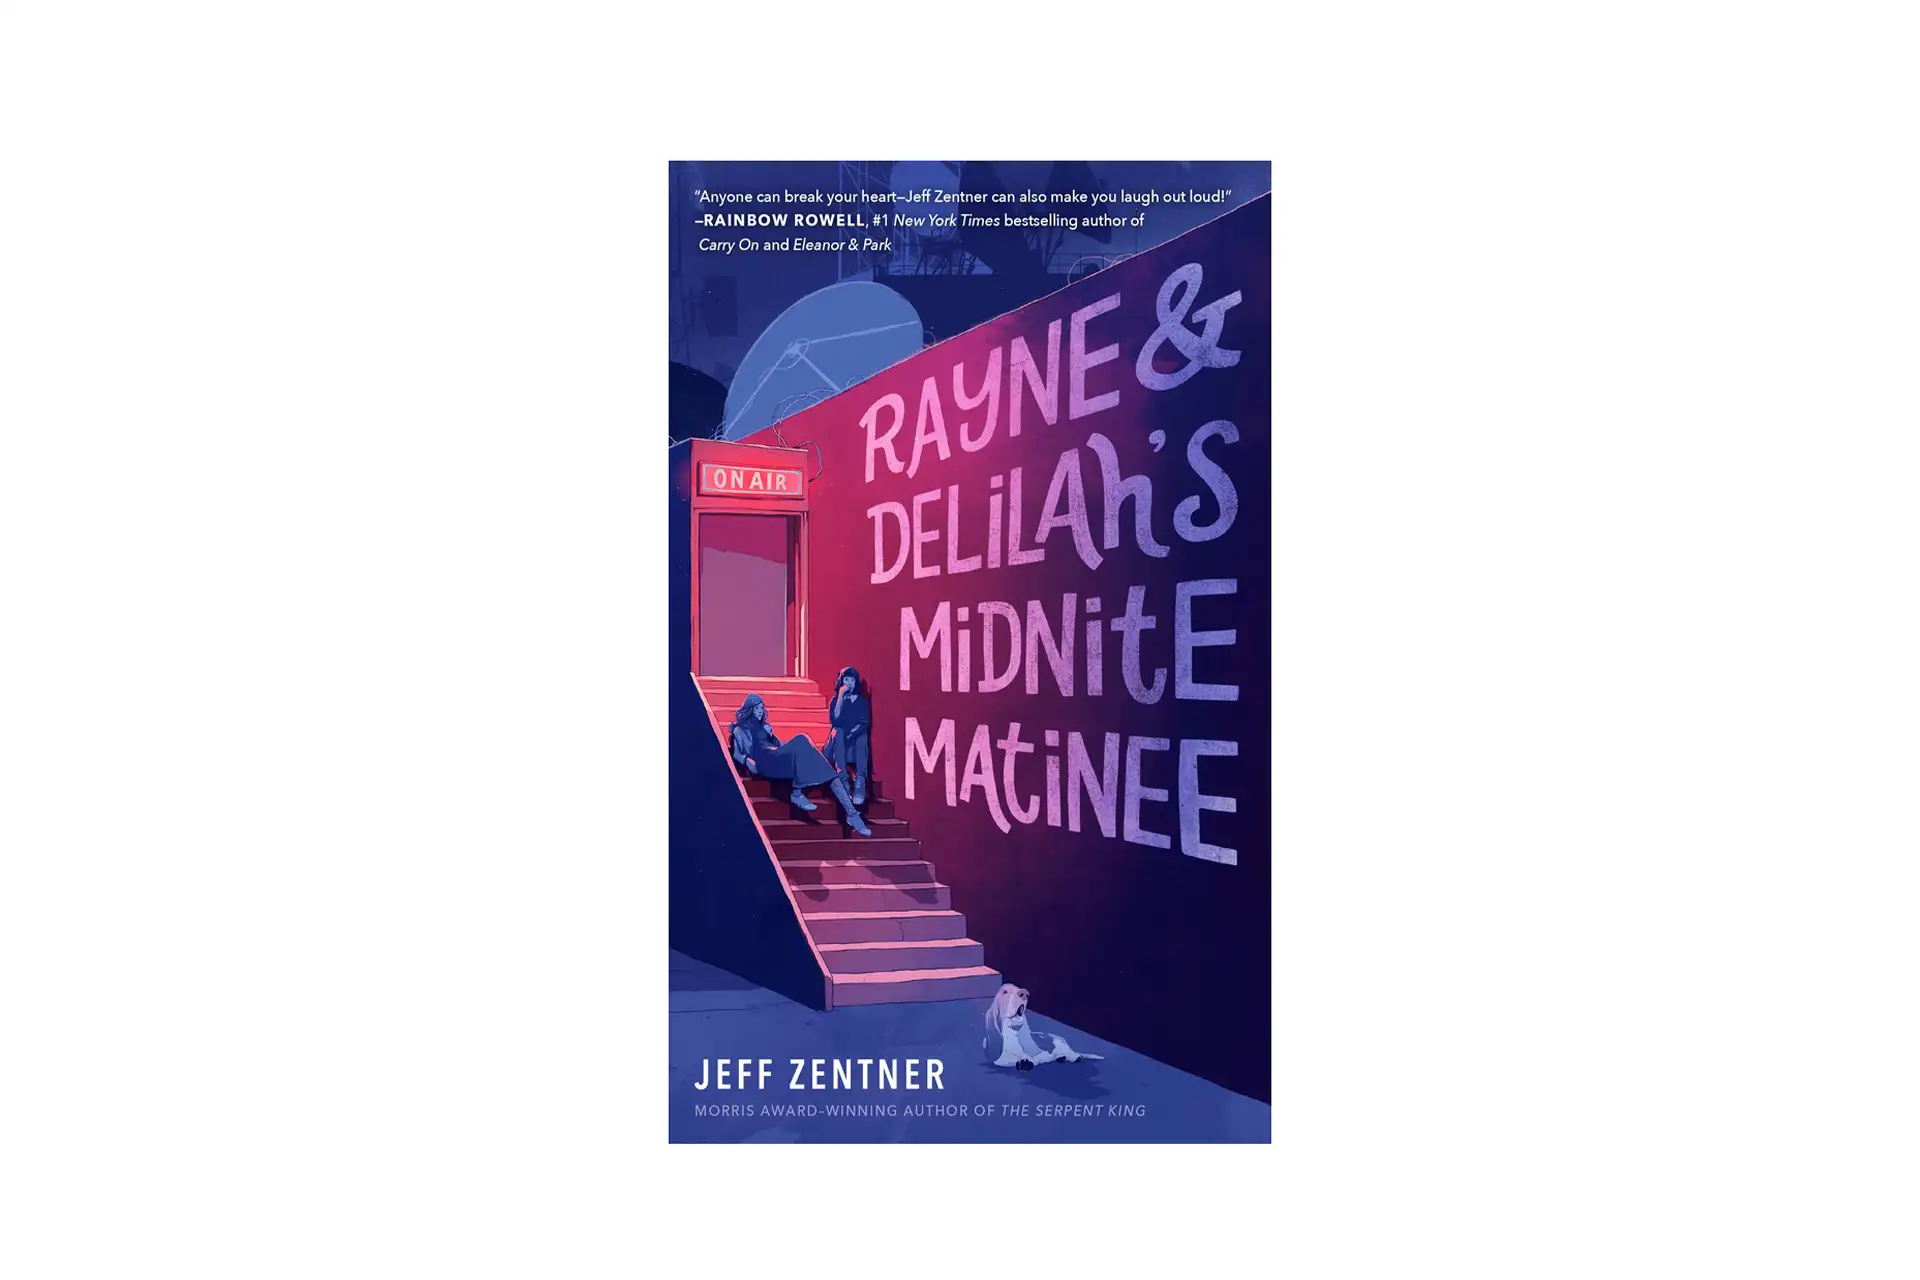 Rayne and Delilah's Midnight Matinee Book; Courtesy of Amazon